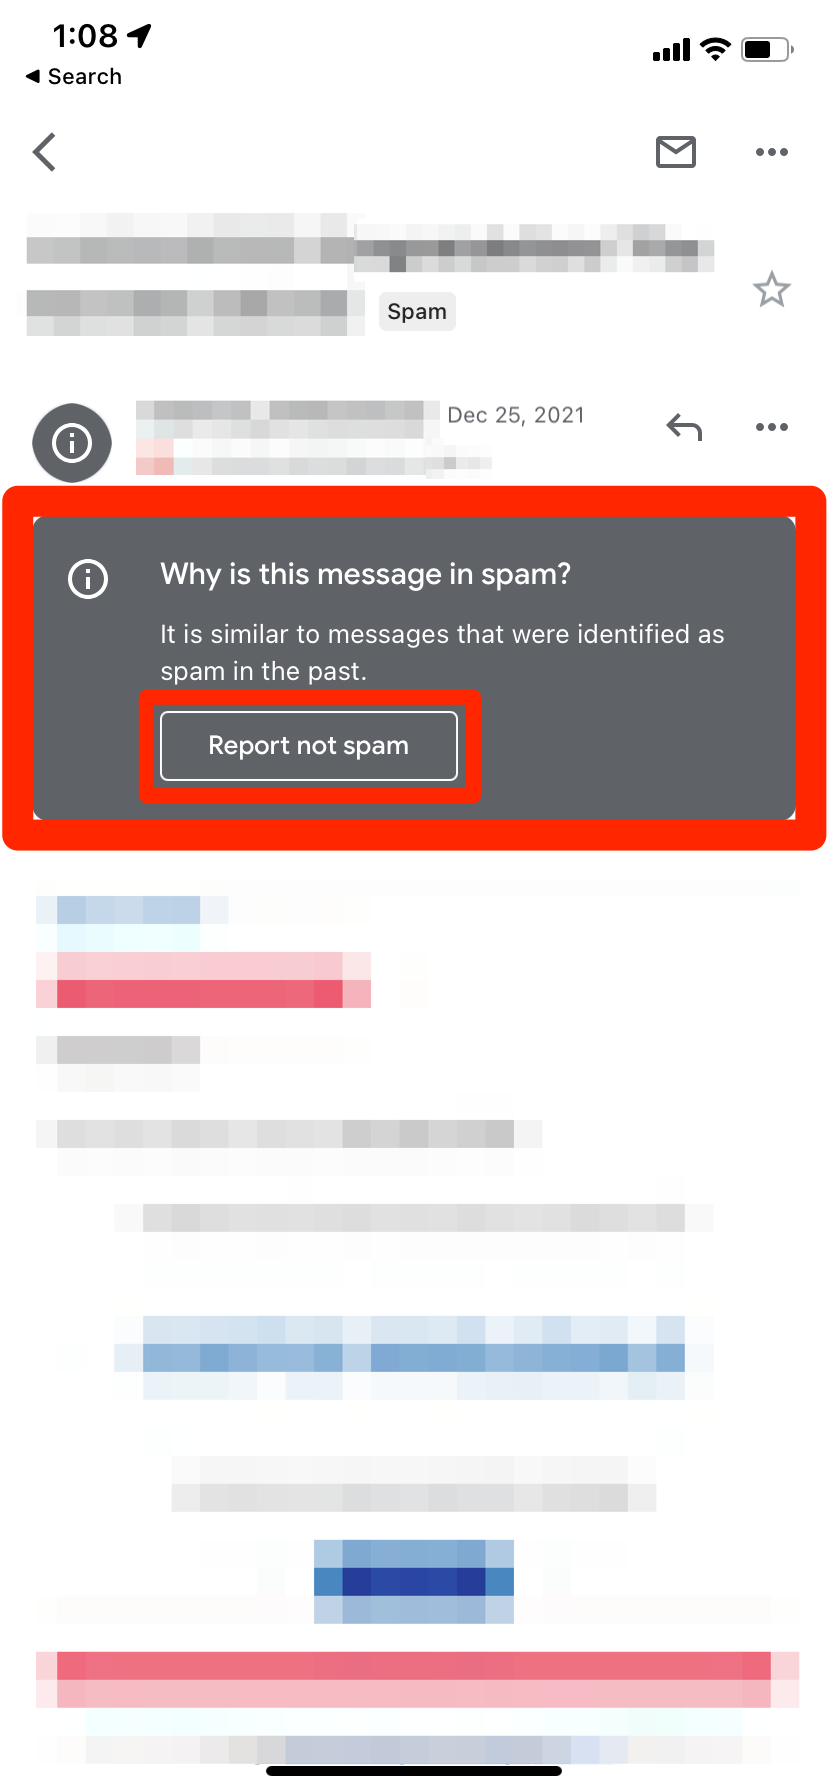 A spam email in the Gmail app. The "Report not spam" option is highlighted.